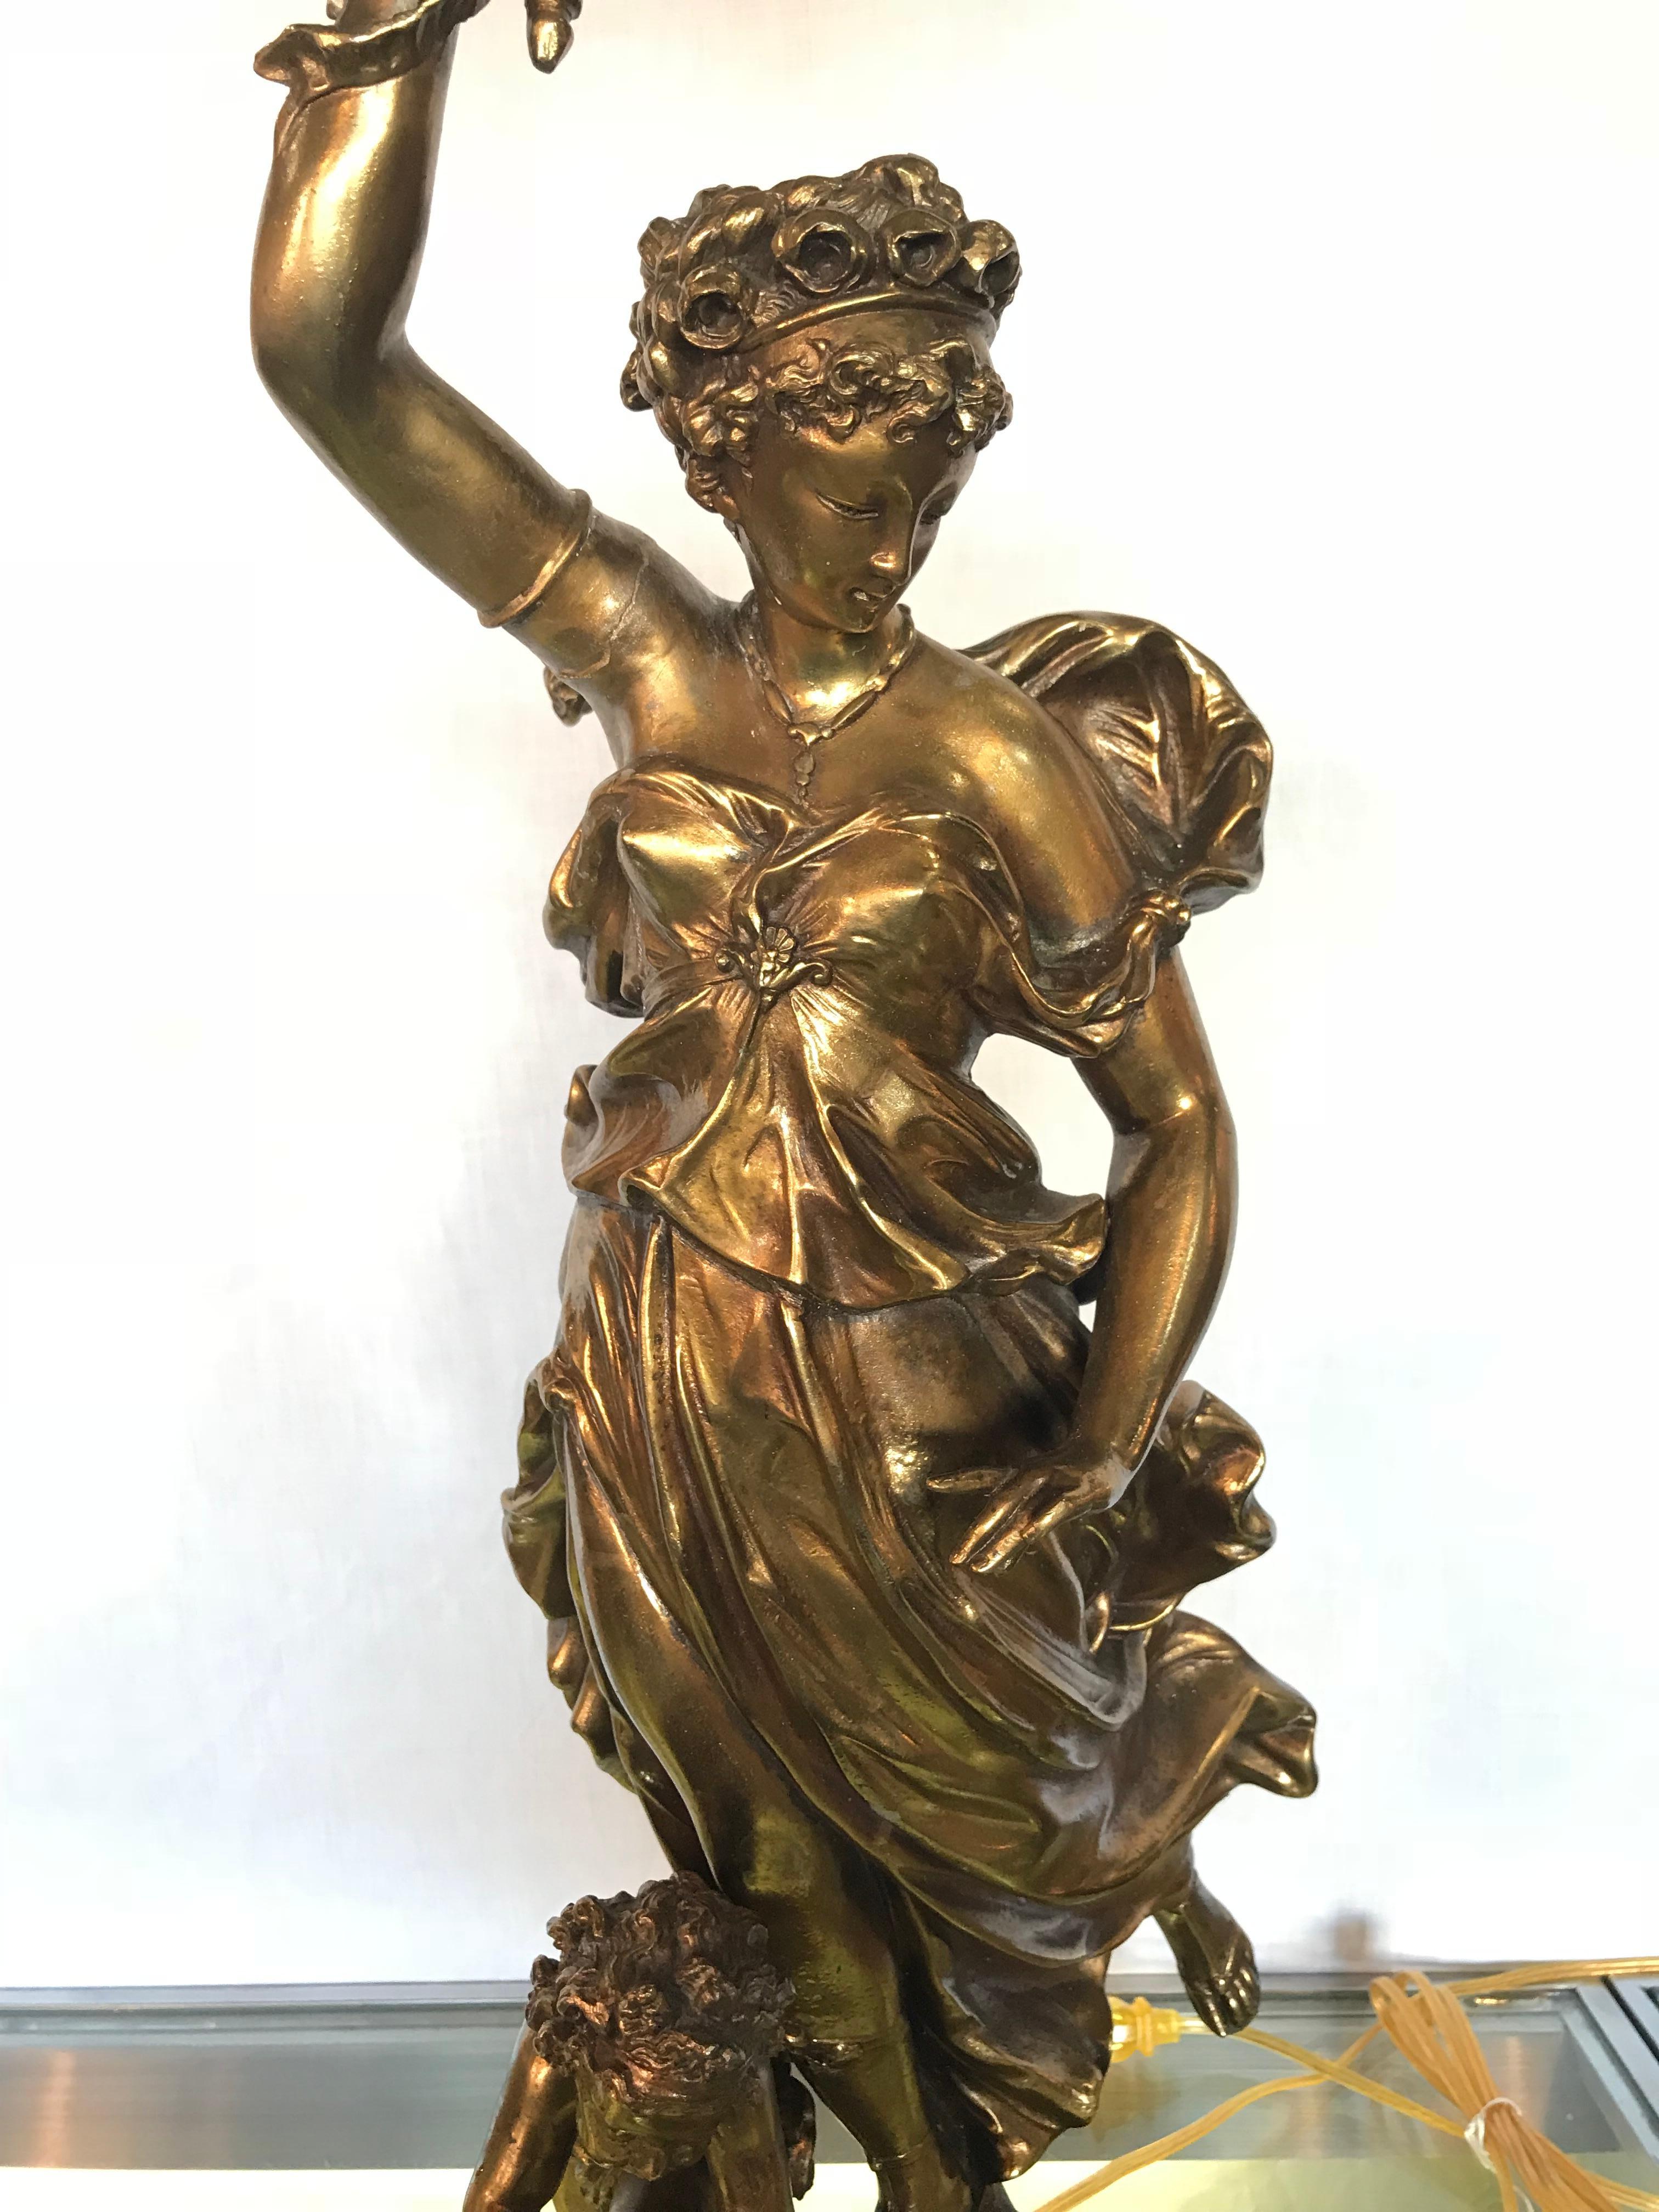 A large white metal figure woman and a child signed wright and butler by Duplex Burner Company. Possibly the finest Duplex Burner lamp ever produced. This large and impressive woman guiding her child in the darkness holding a colored glass shade.